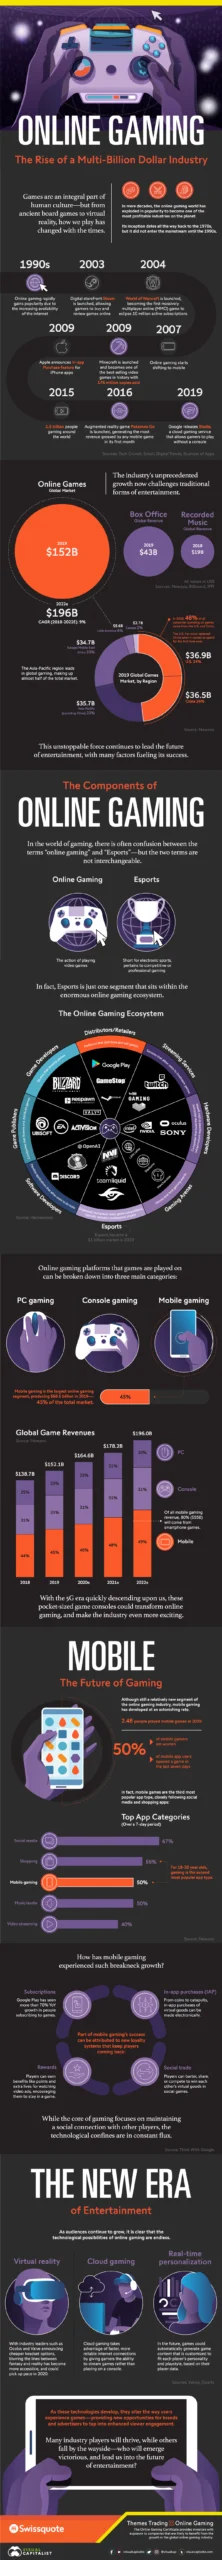 Online Gaming – The Rise Of A Multi-Billion Dollar Industry
